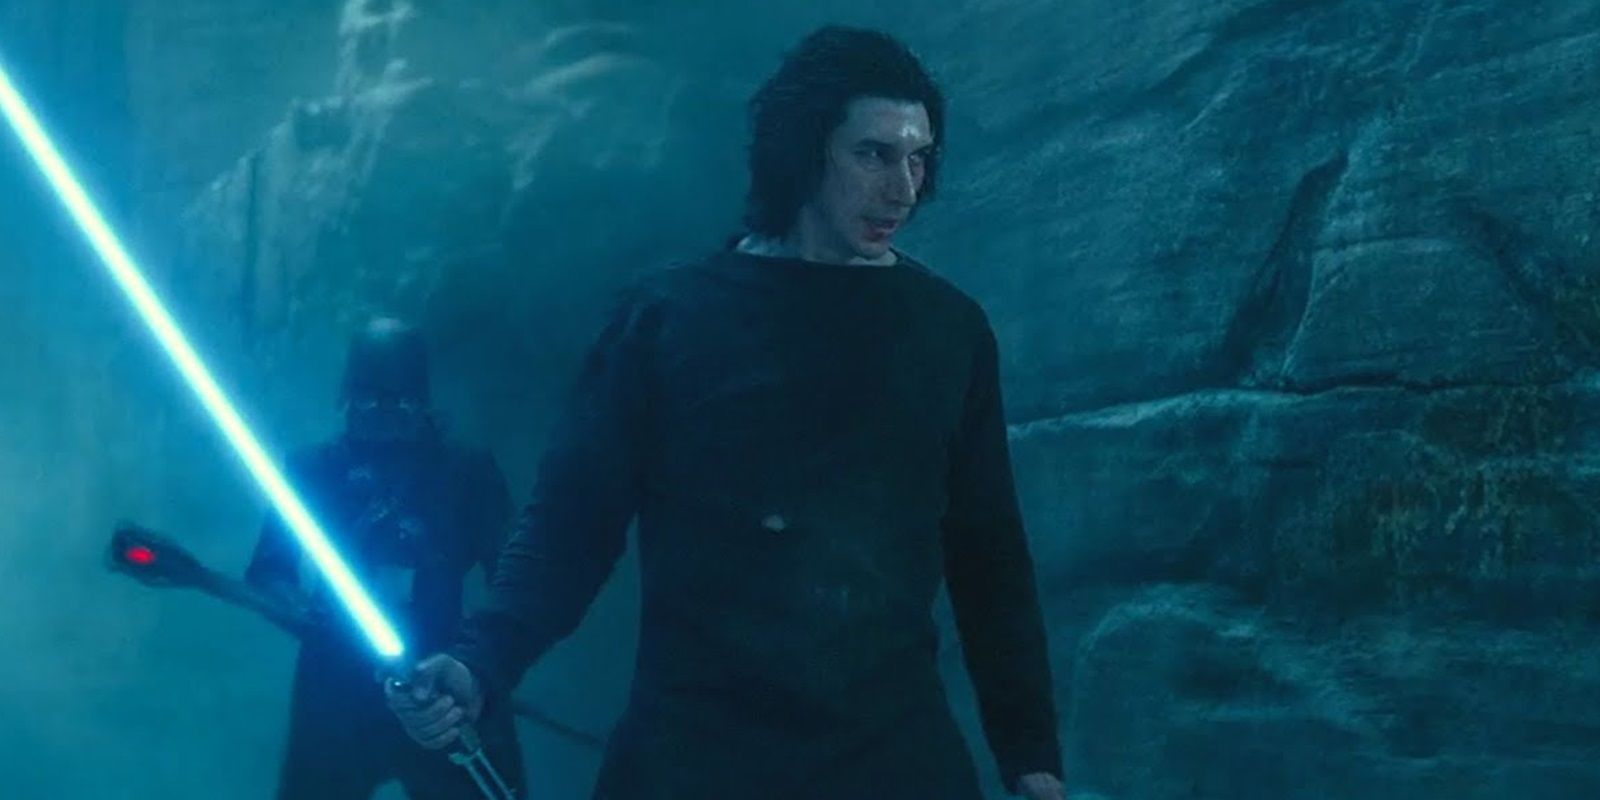 Ben Solo takes on the Knights of Ren in The Rise of Skywalker